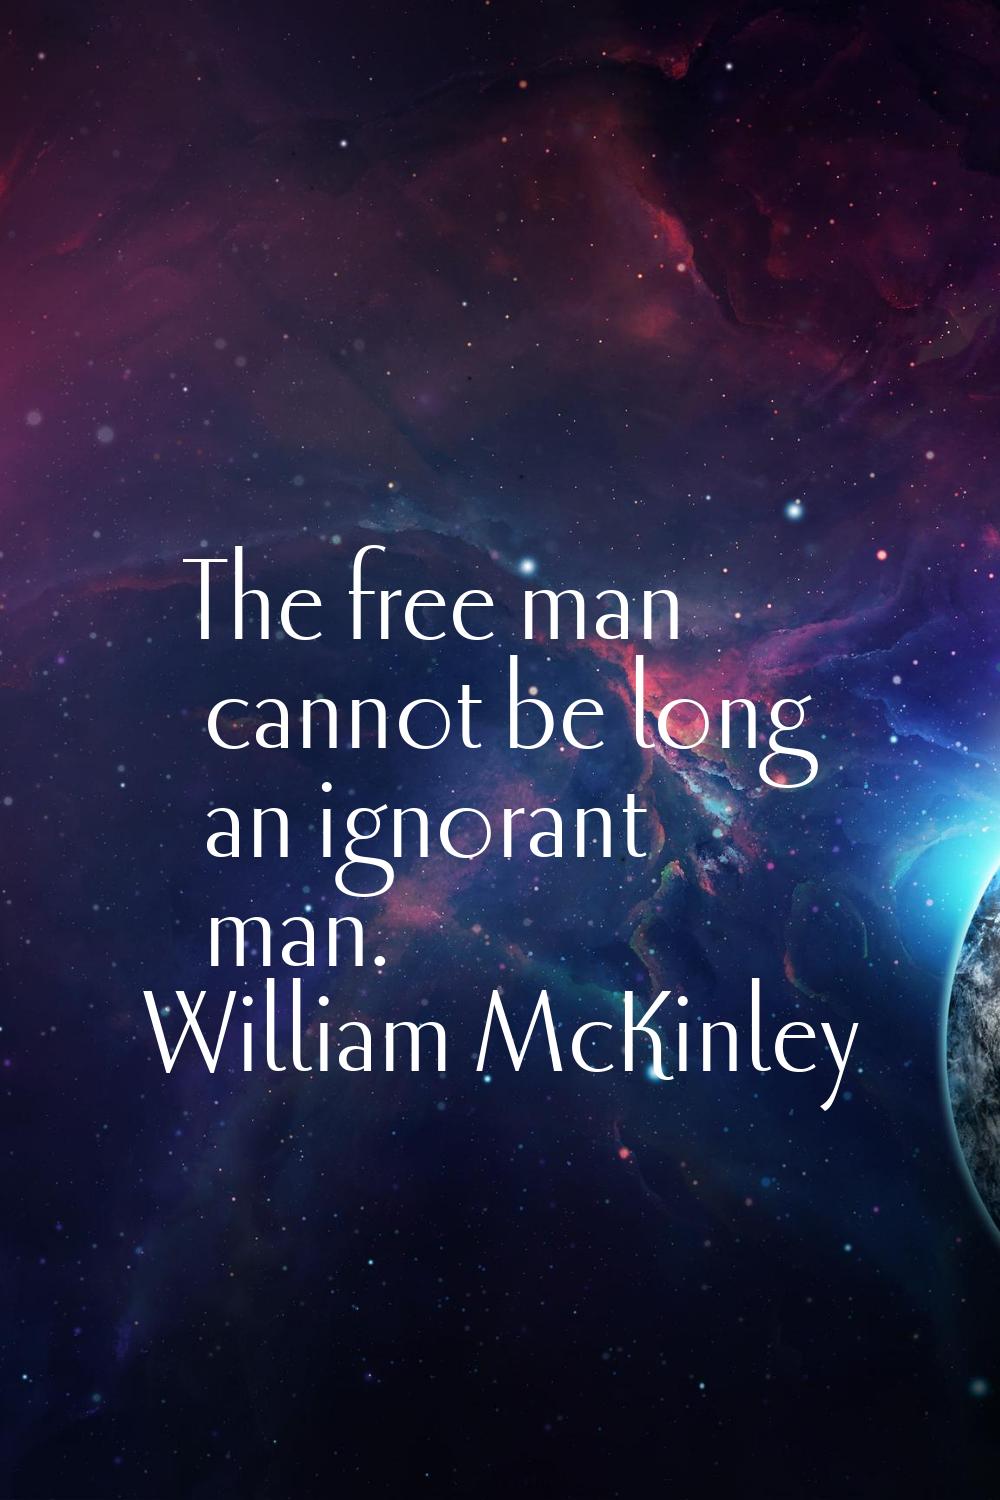 The free man cannot be long an ignorant man.